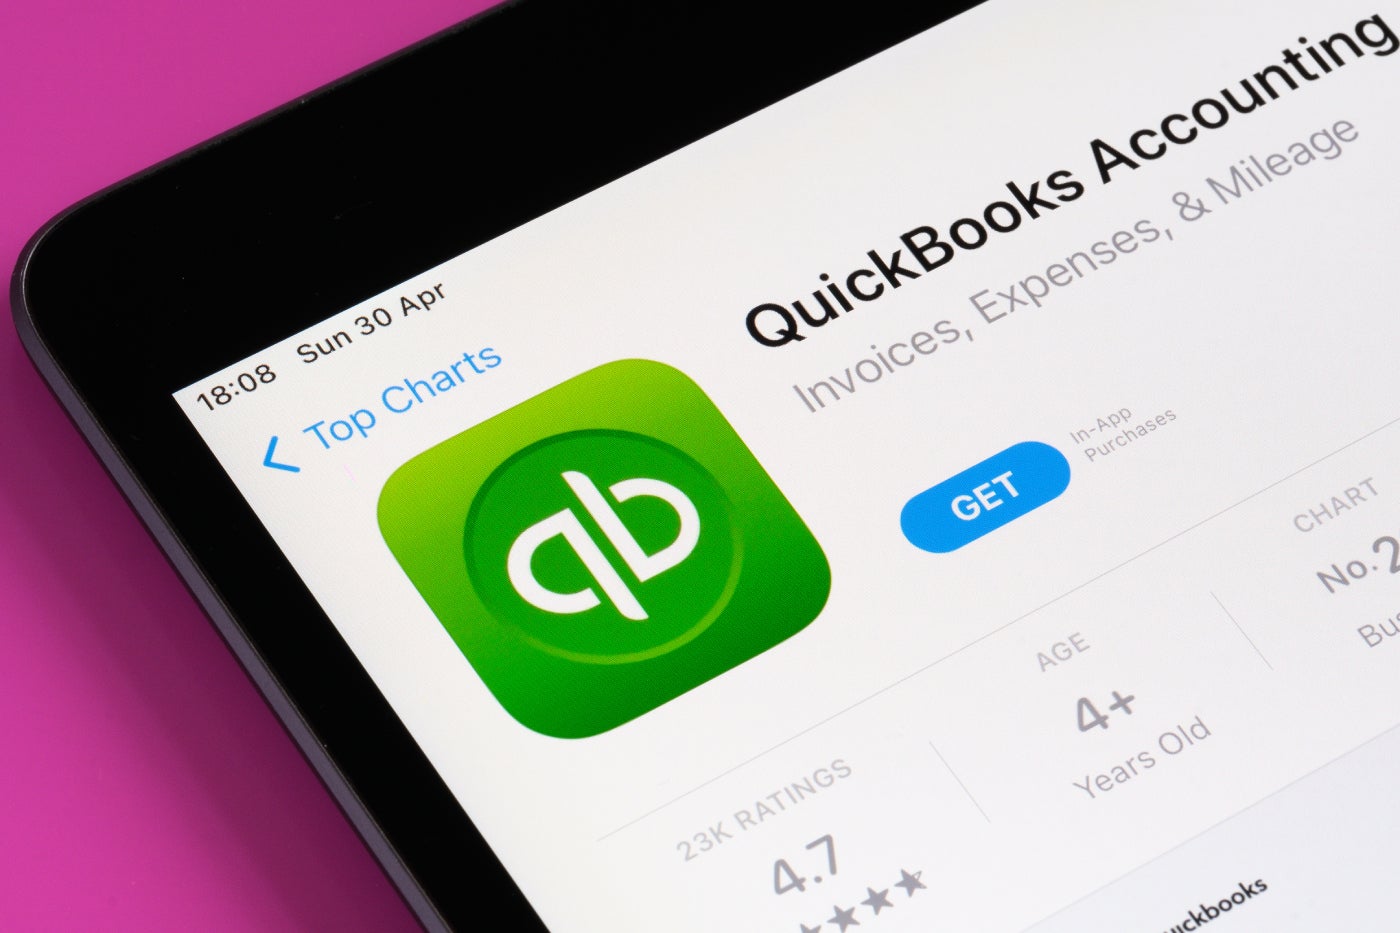 QuickBooks Accounting Software Product Comparison